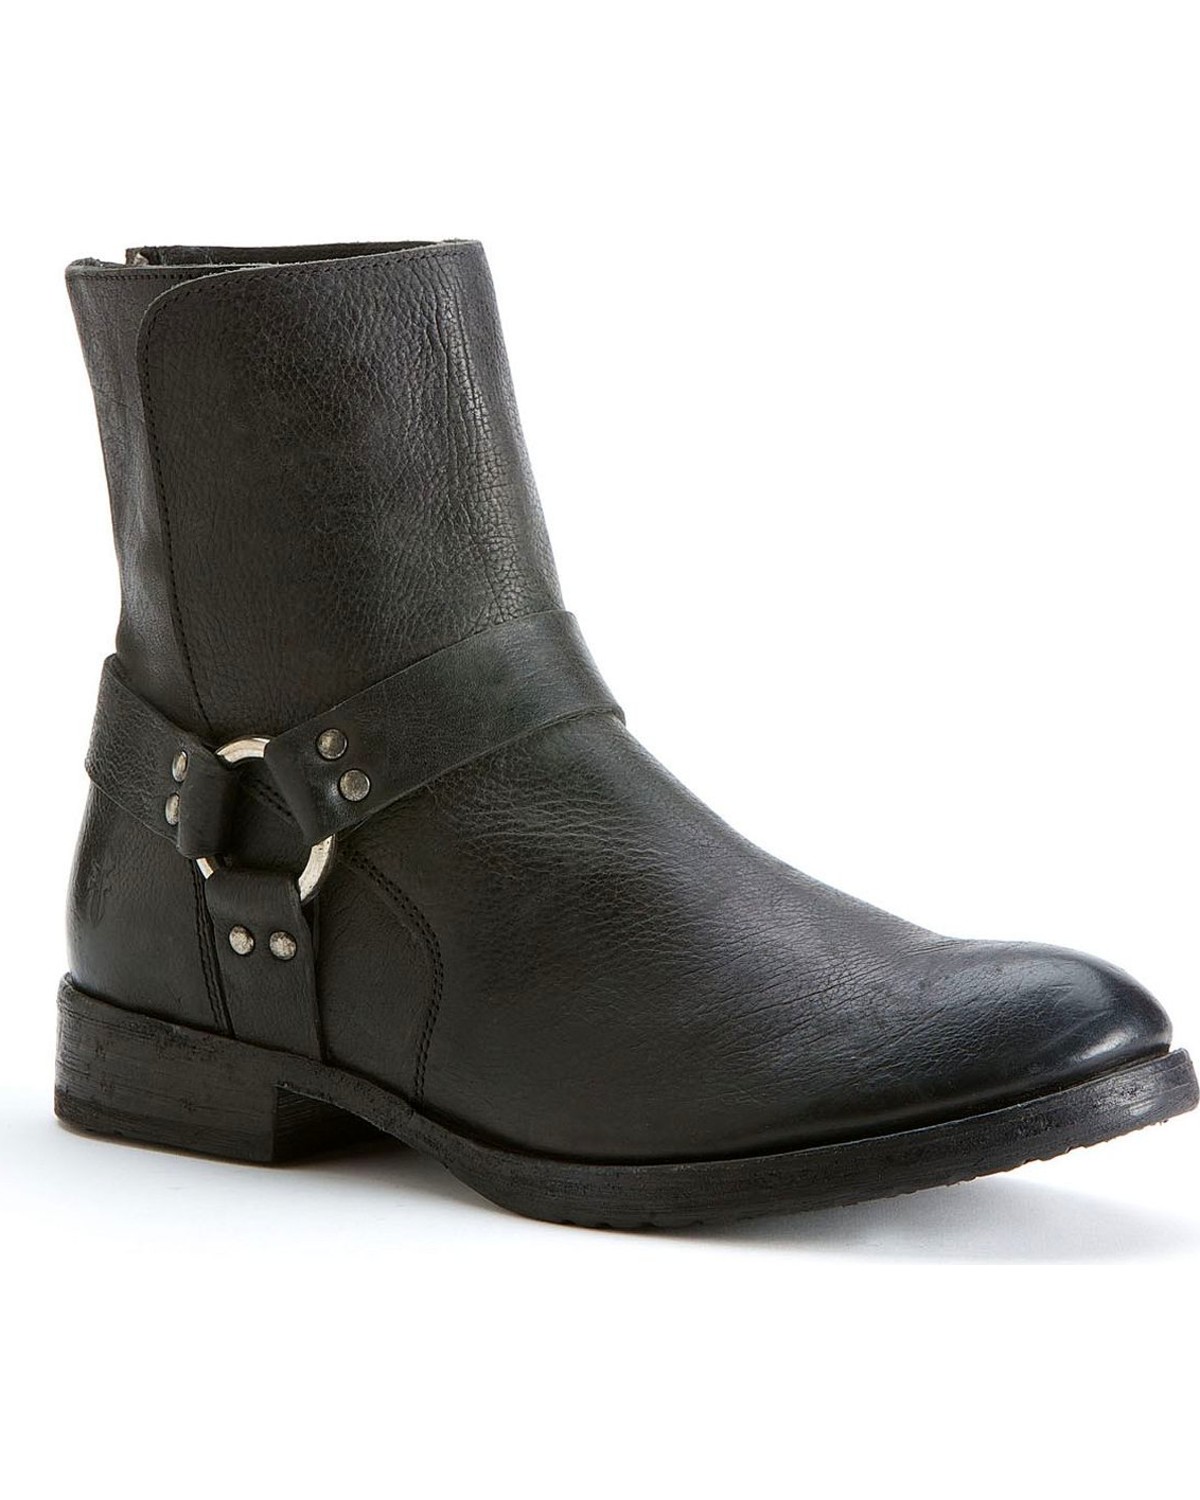 mens leather harness boots